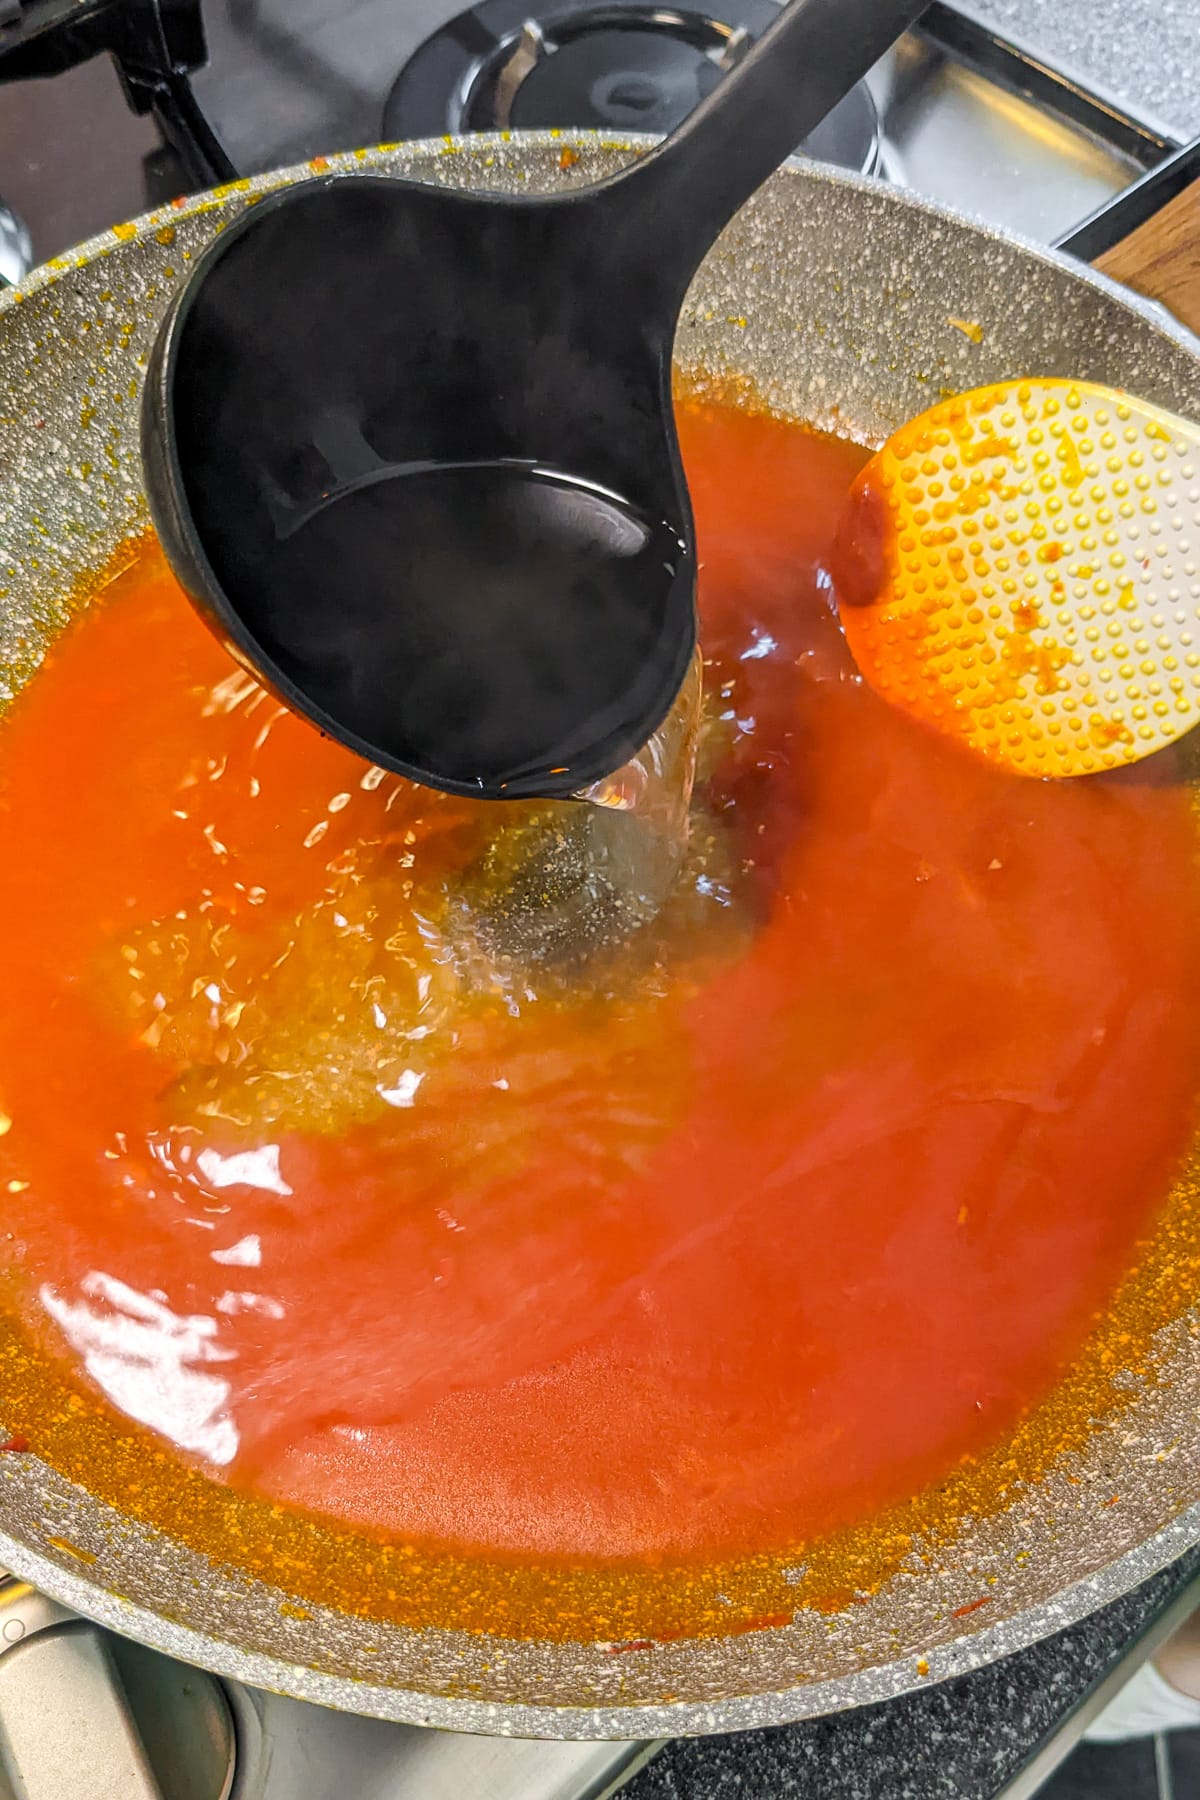 Pouring boiled water over tomato pasta.